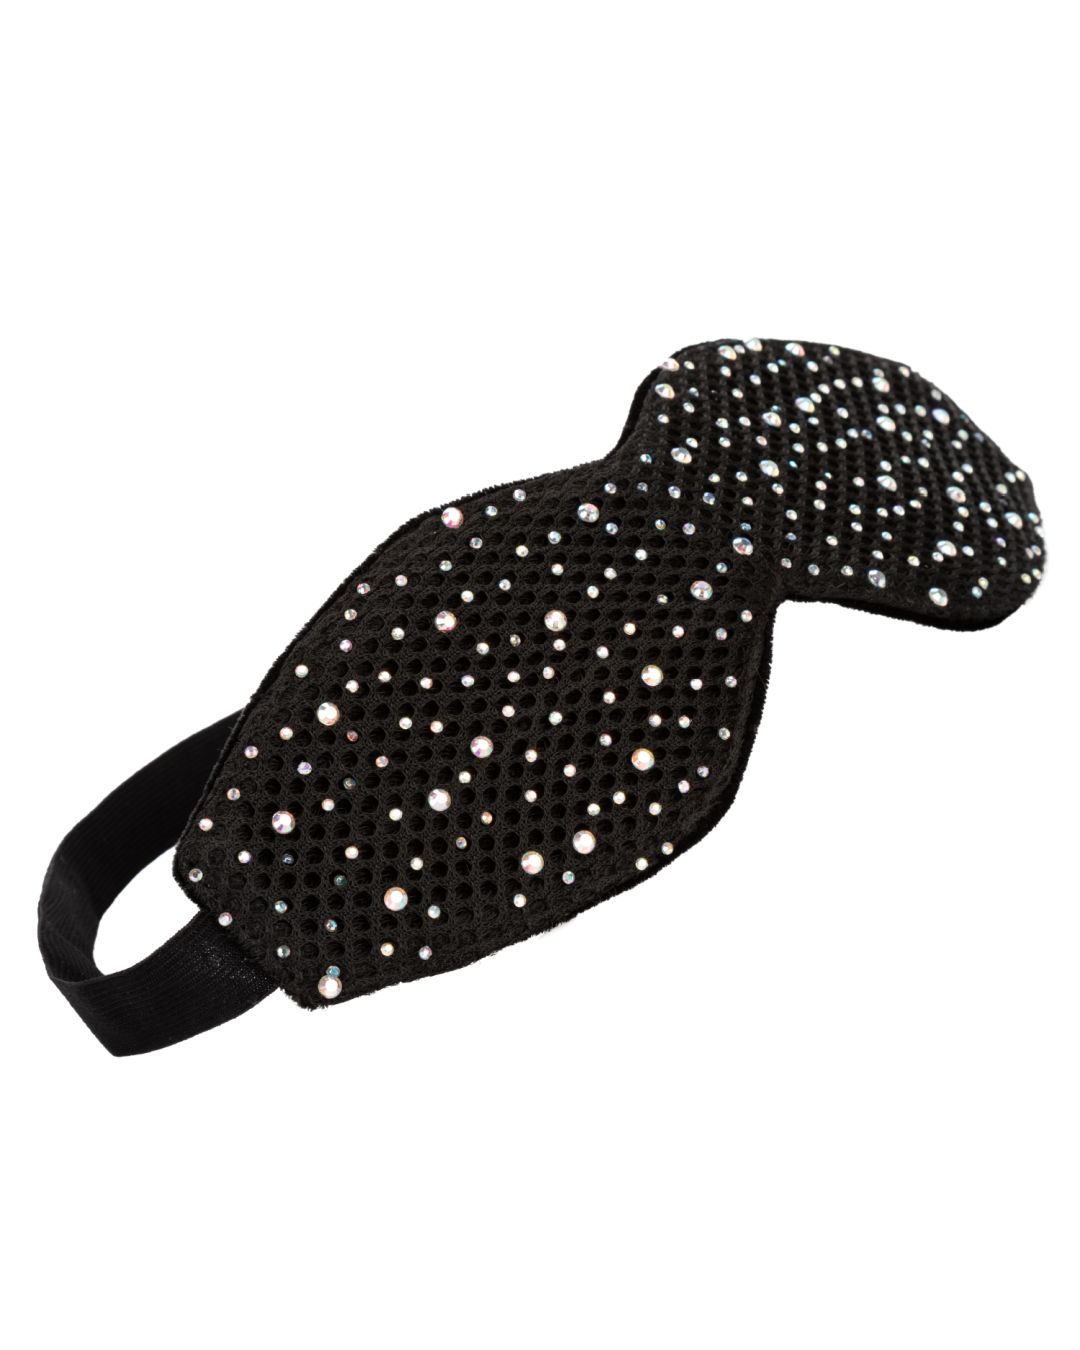 Radiance™ Blackout Eye Mask with Gem Accents